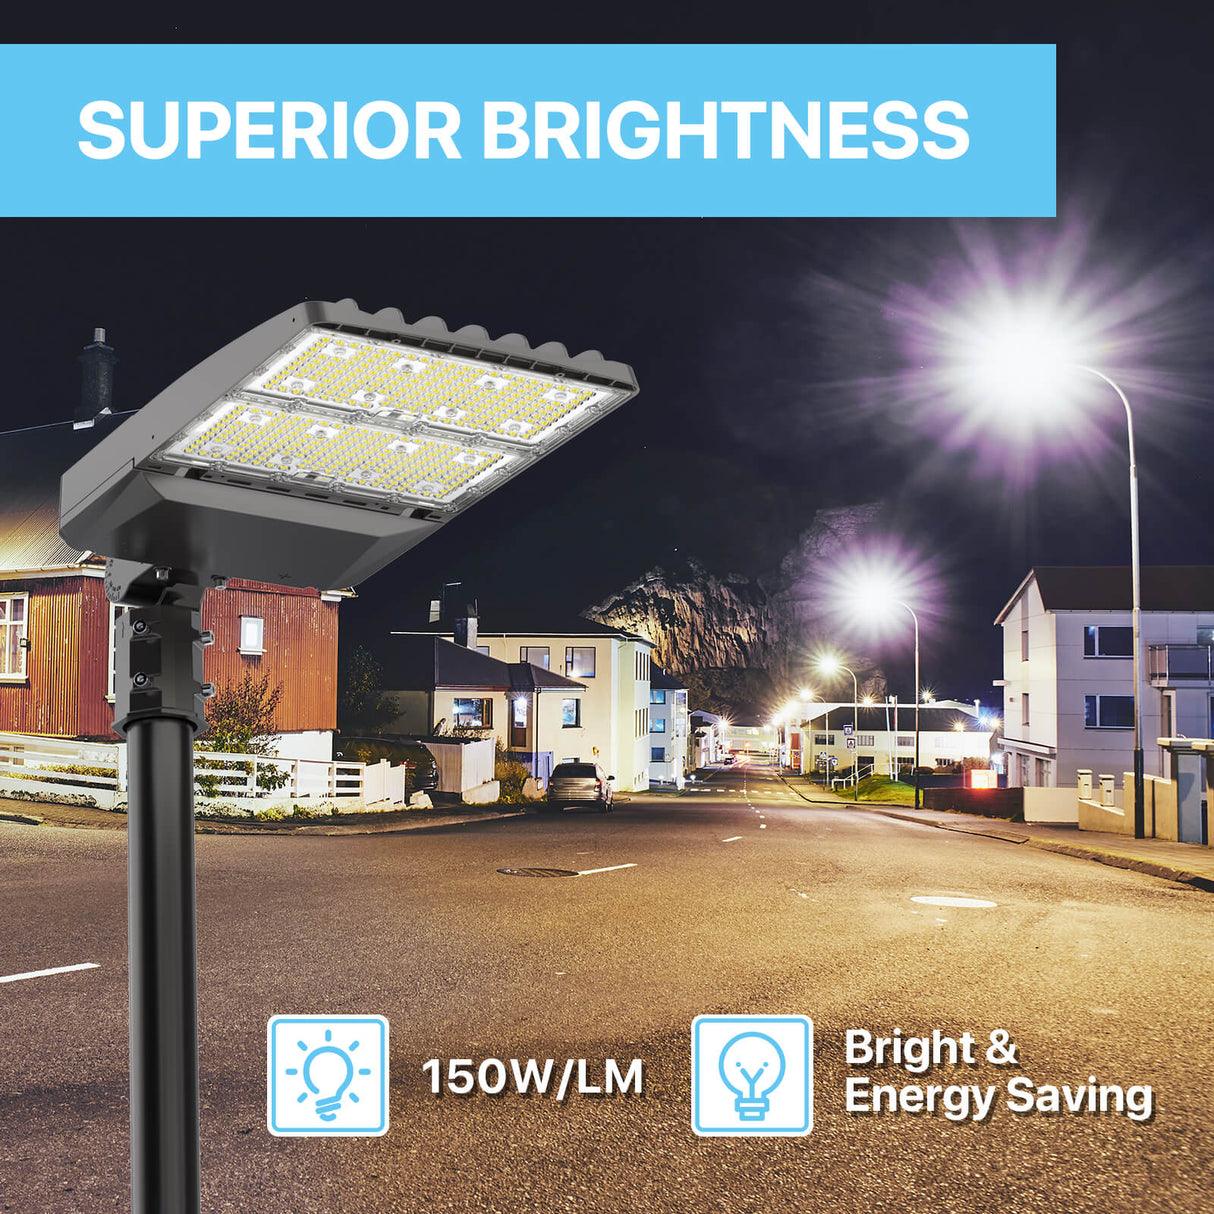 150w parking lot light is suitable for street lighting, super bright and energy saving